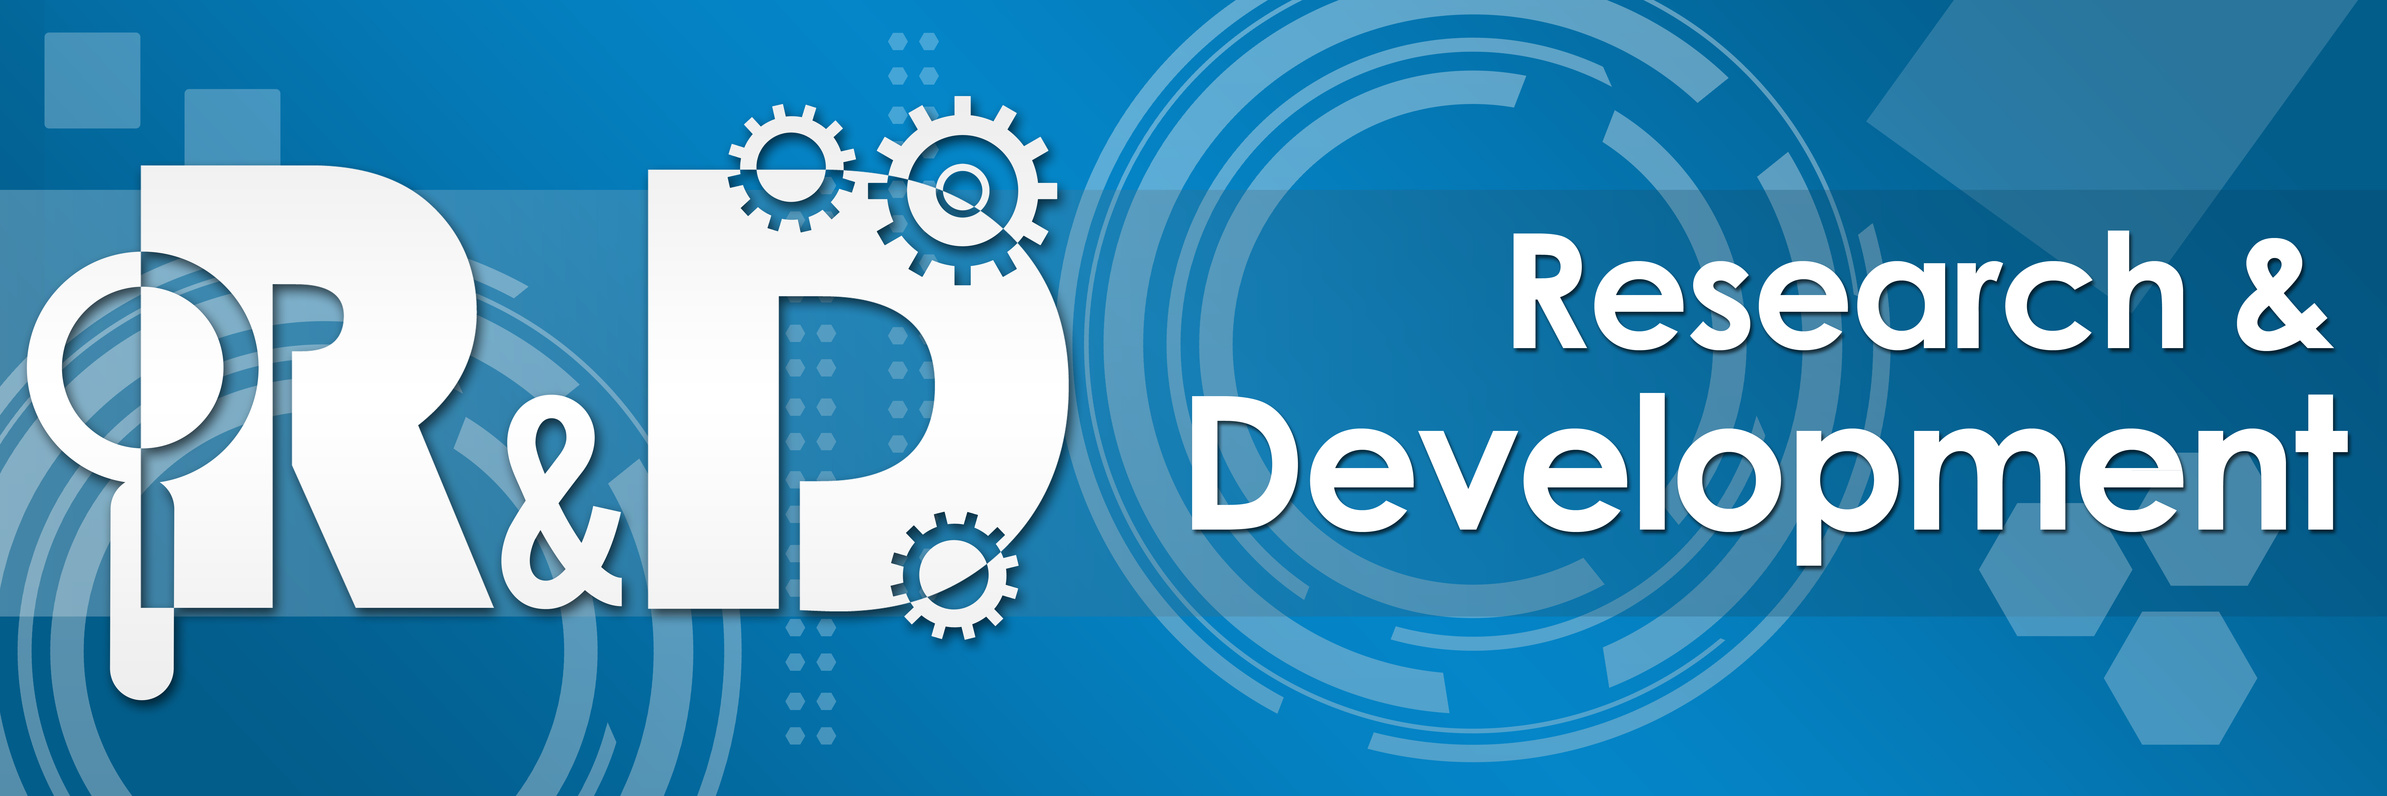 R And D - Research And Development Tecy Background Banner